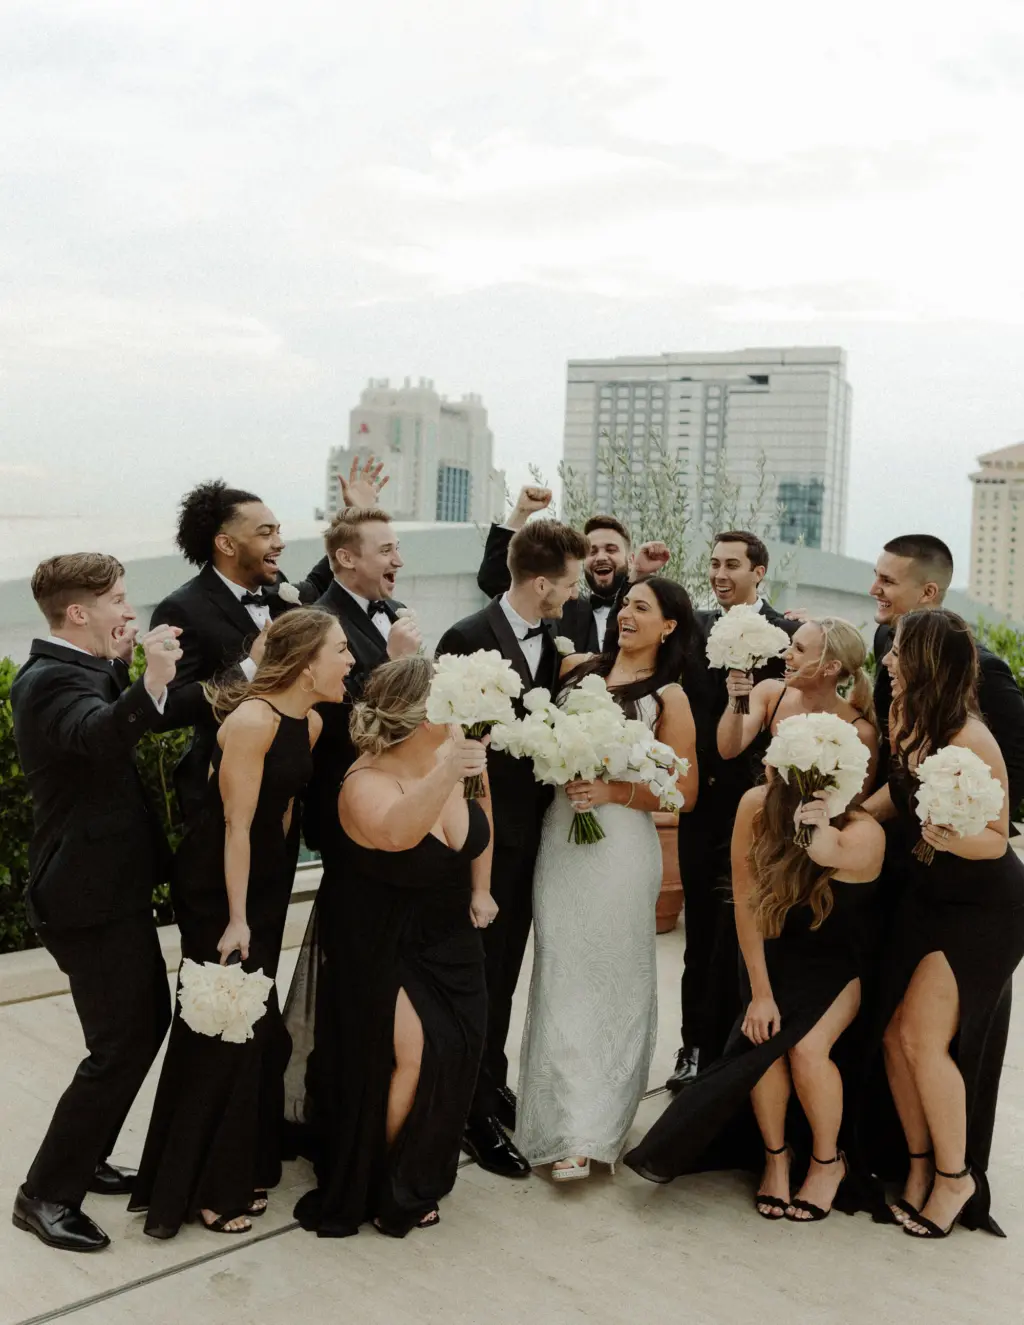 Bride and Groom with Wedding Party | Modern Black Tie Wedding Inspiration